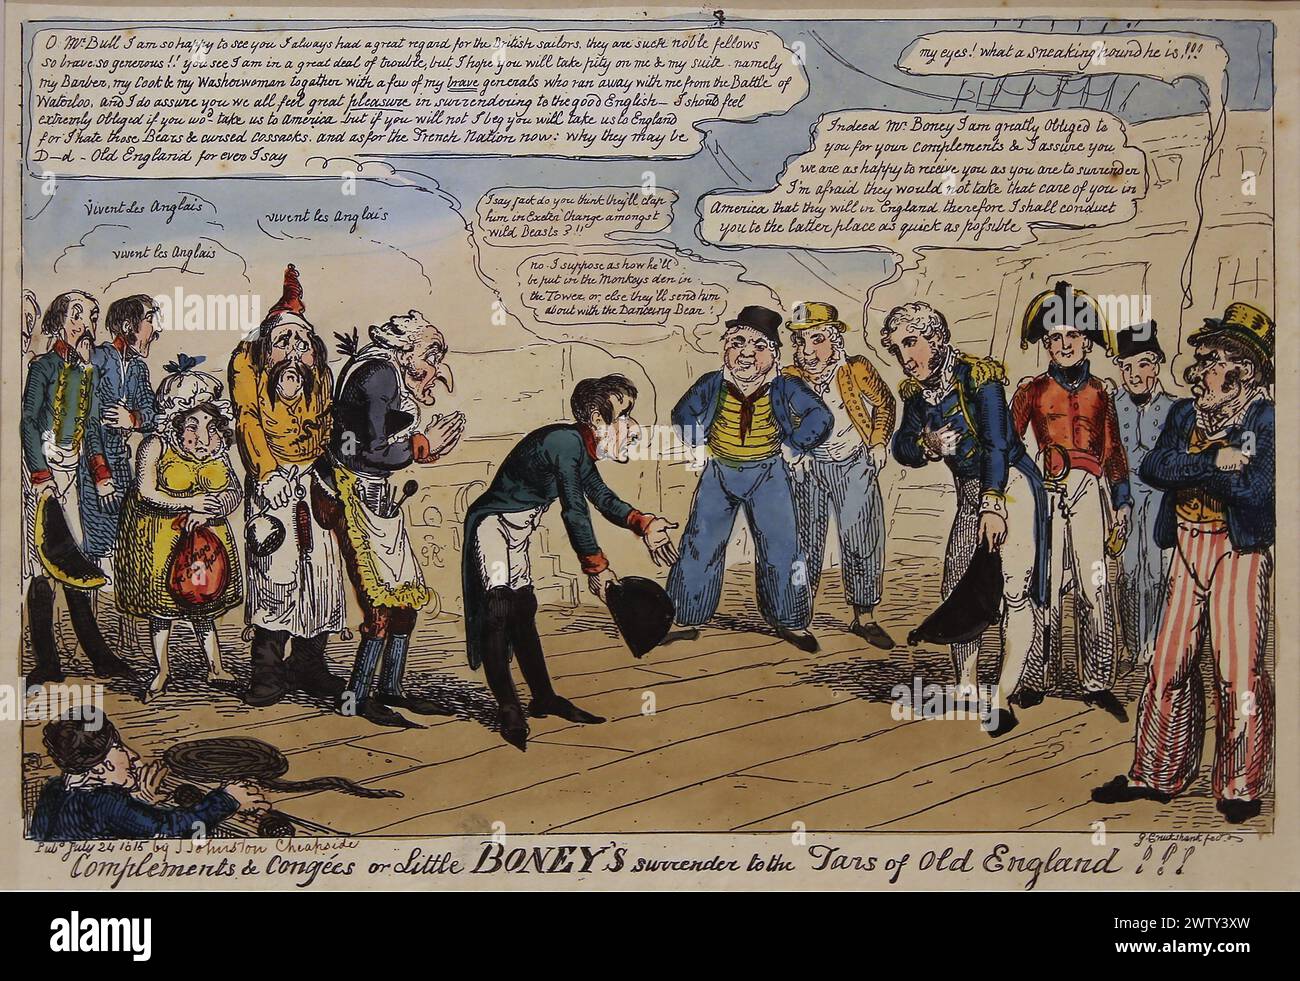 English comic strips also decredit their opponent (the Napoleonic France). The surrender of Napoleon. Engraving, 1815. Stock Photo